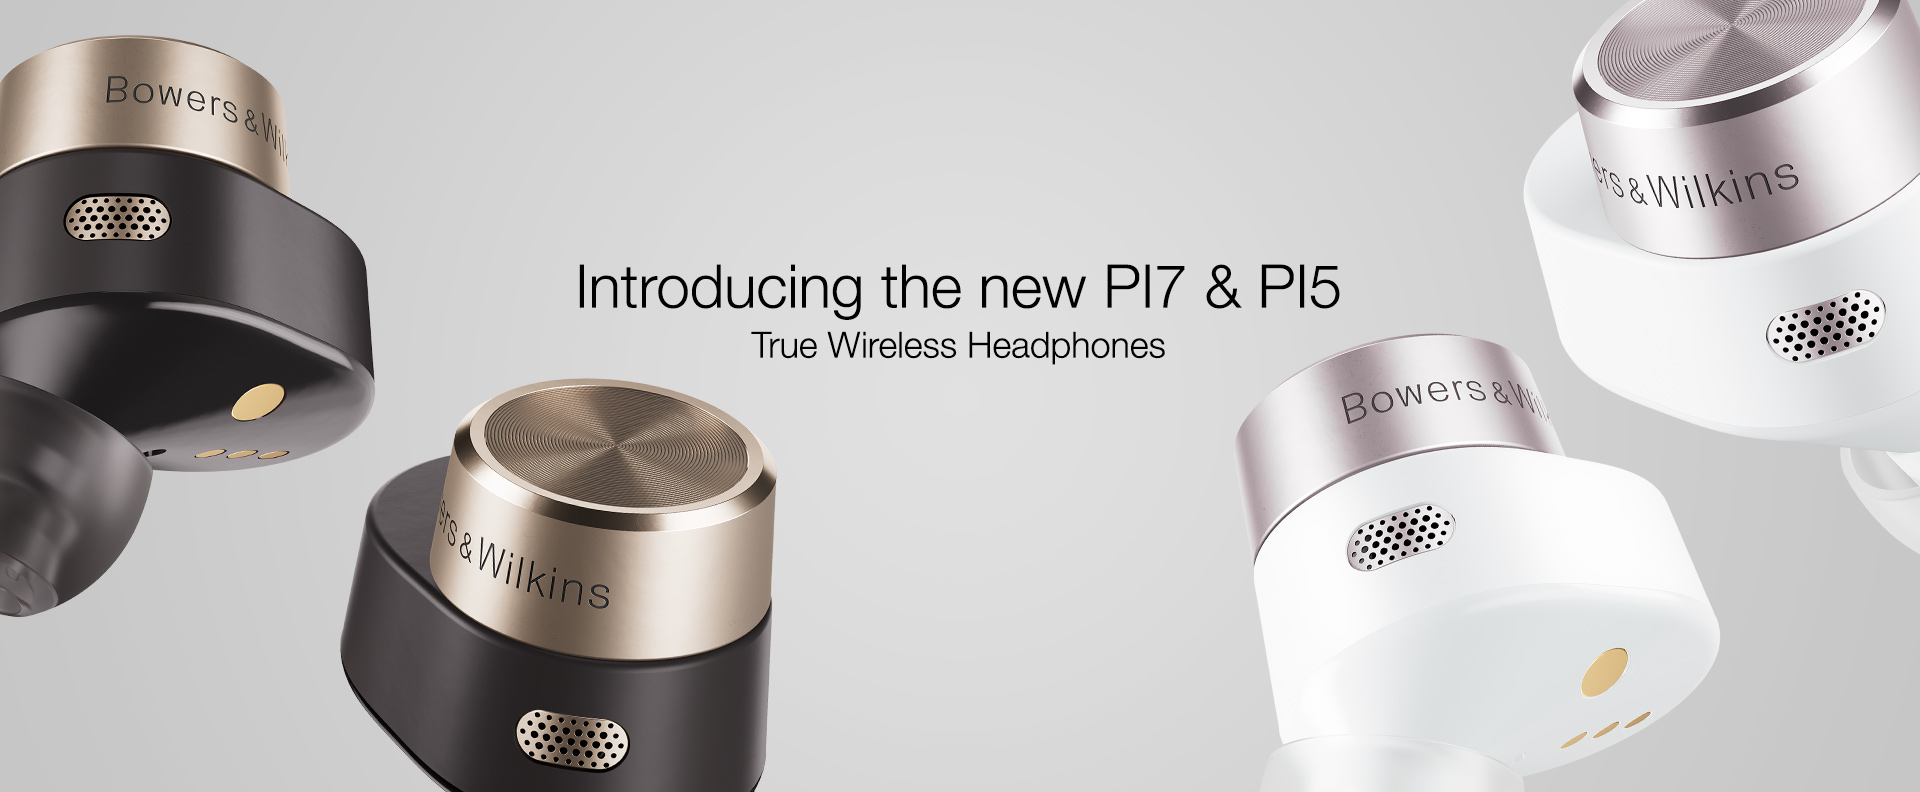 Bowers & Wilkins launch their first true wireless earbuds – PI7 & PI5